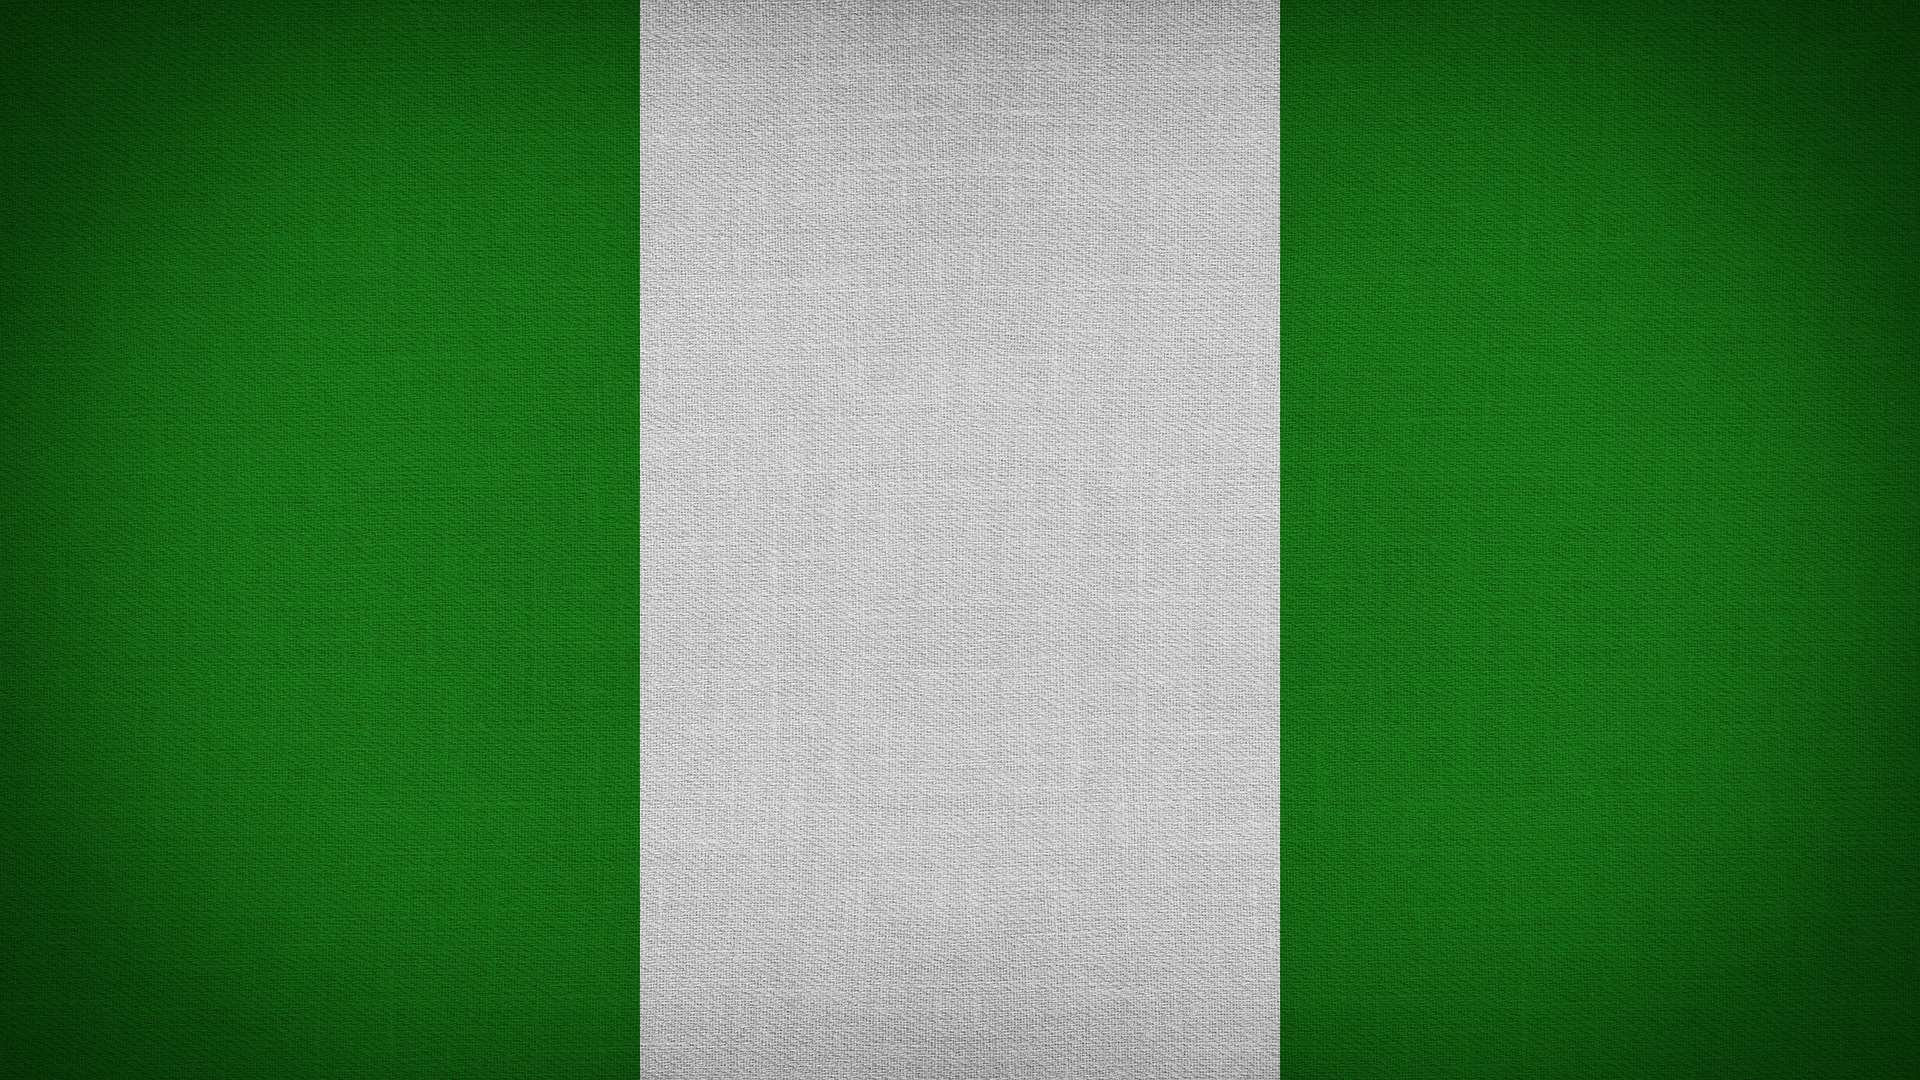 The Nigerian flag is shown with vertical green, white, and green stripes.